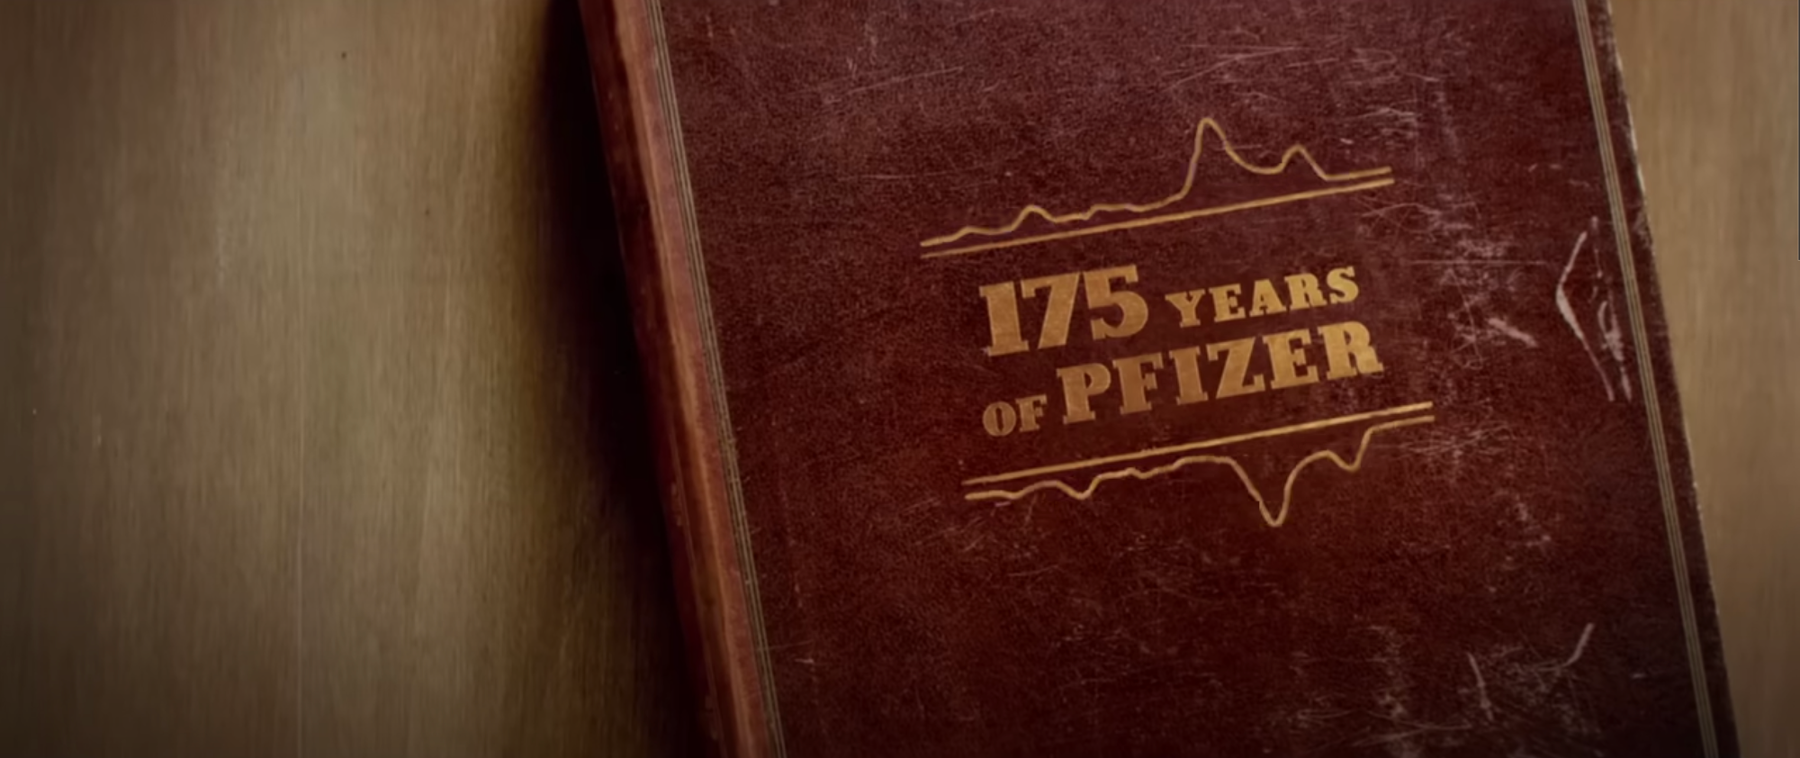 A shot from Pfizers Super Bowl ad showing a book titled 175 Years of Pfizer